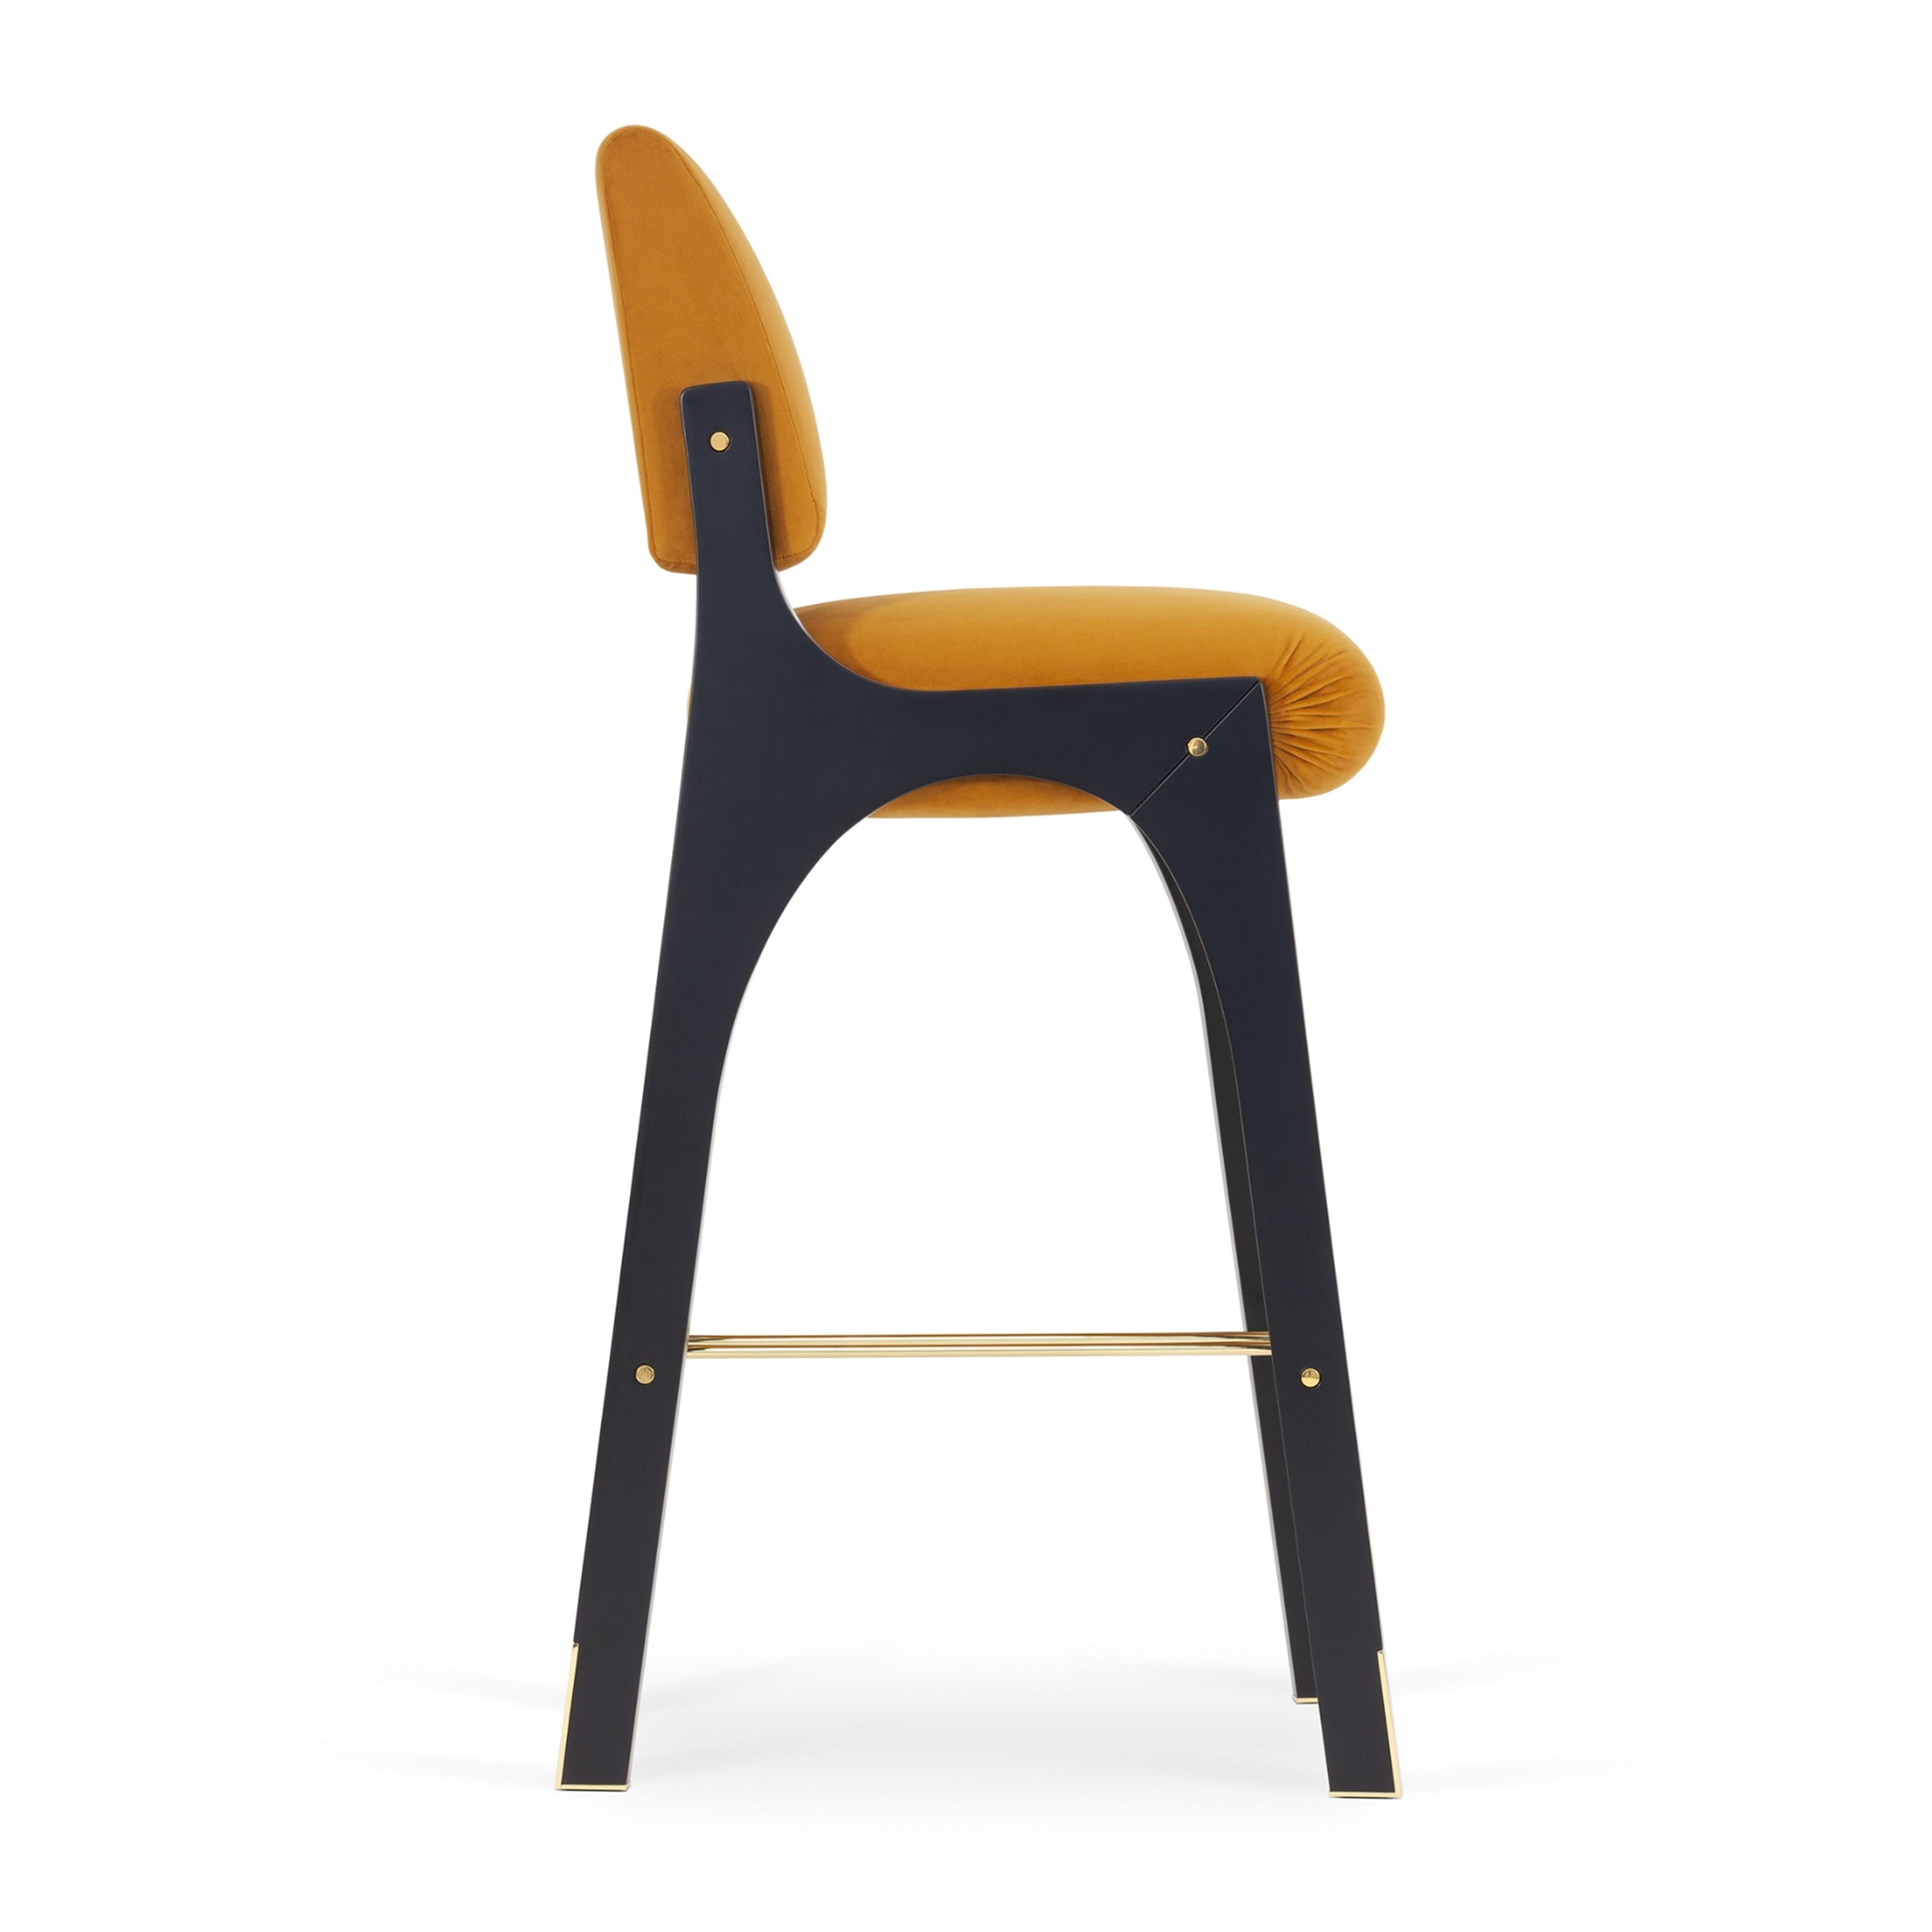 The Arches II bar stool is designed in the likeness of the architectural scale that suggests a crossing through the structures of a utopian city, organized by the principles of symmetry and ideal forms.

The Arches II bar stool is a redesign of the